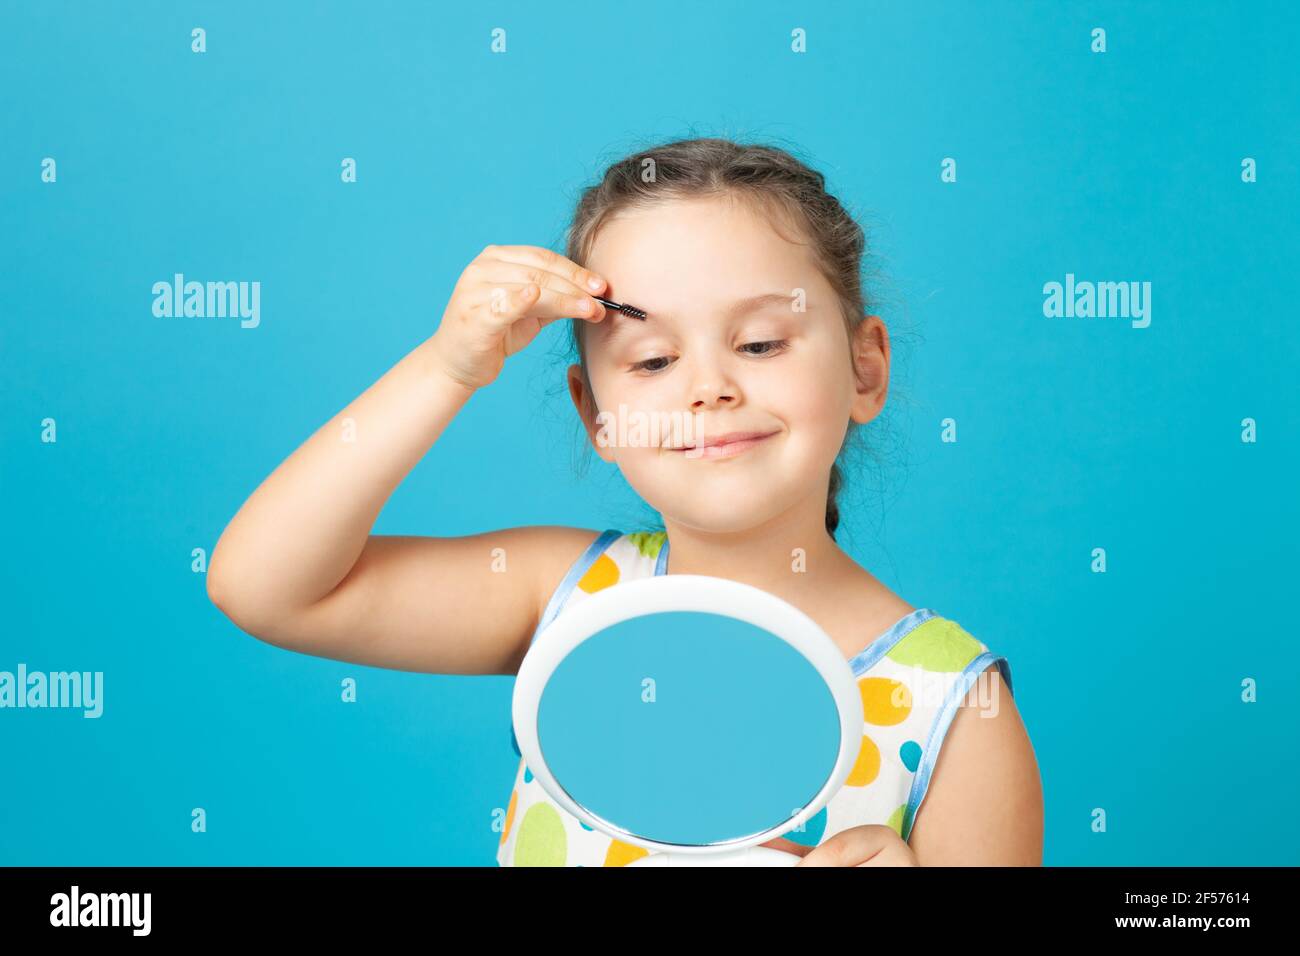 close-up portrait of a girl in a white dress combing her eyebrows with a brush and making up, isolated on a blue background Stock Photo